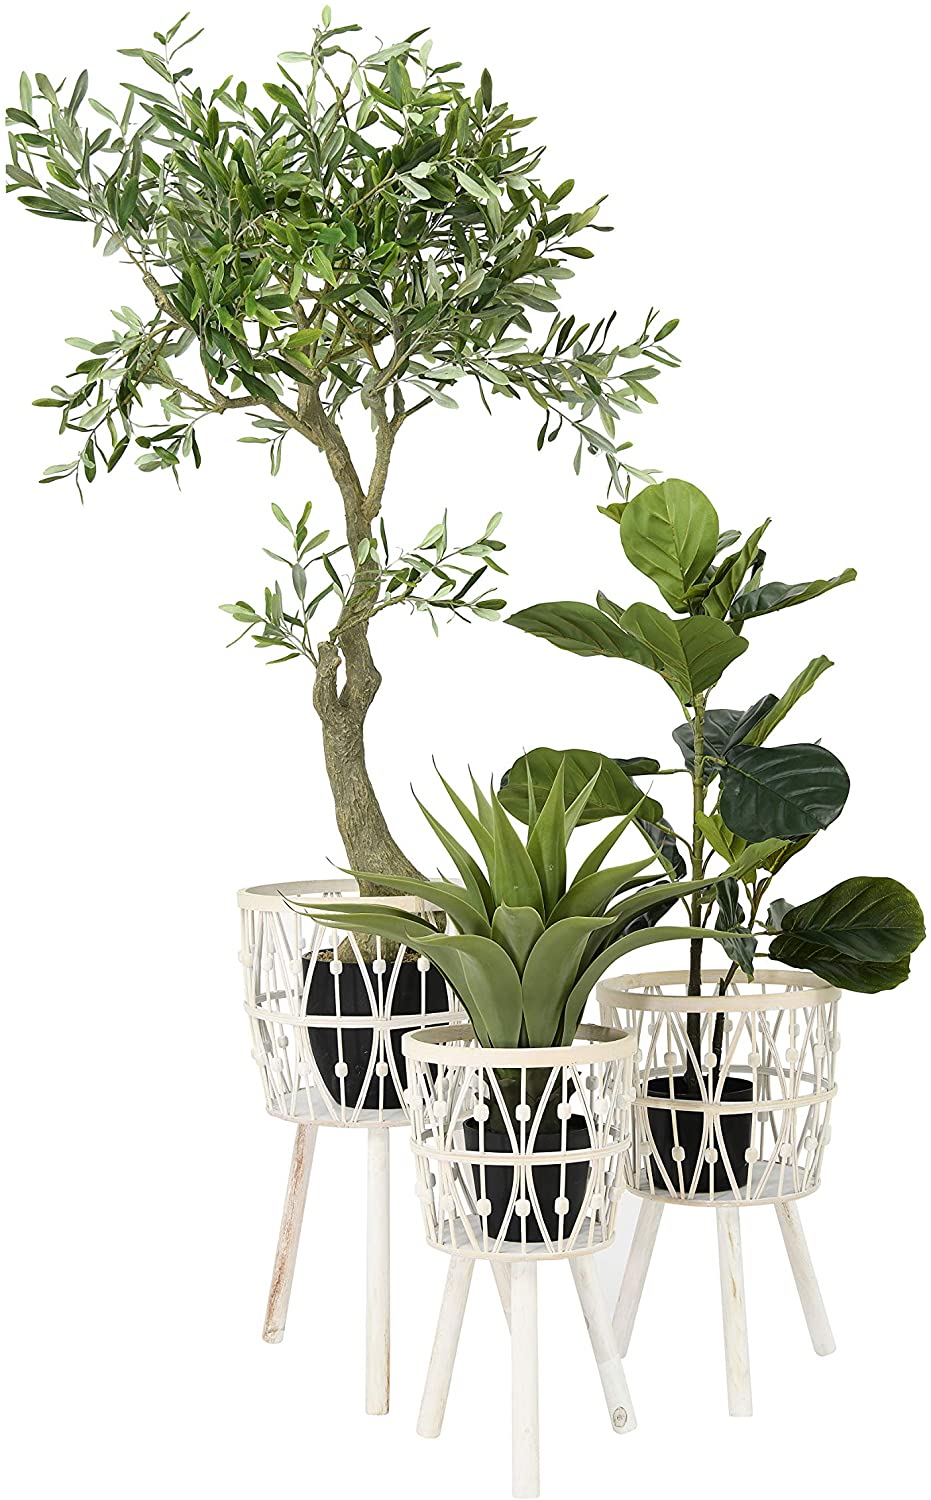 all three sizes of bamboo and wood baskets with legs filled with large plants against a white background